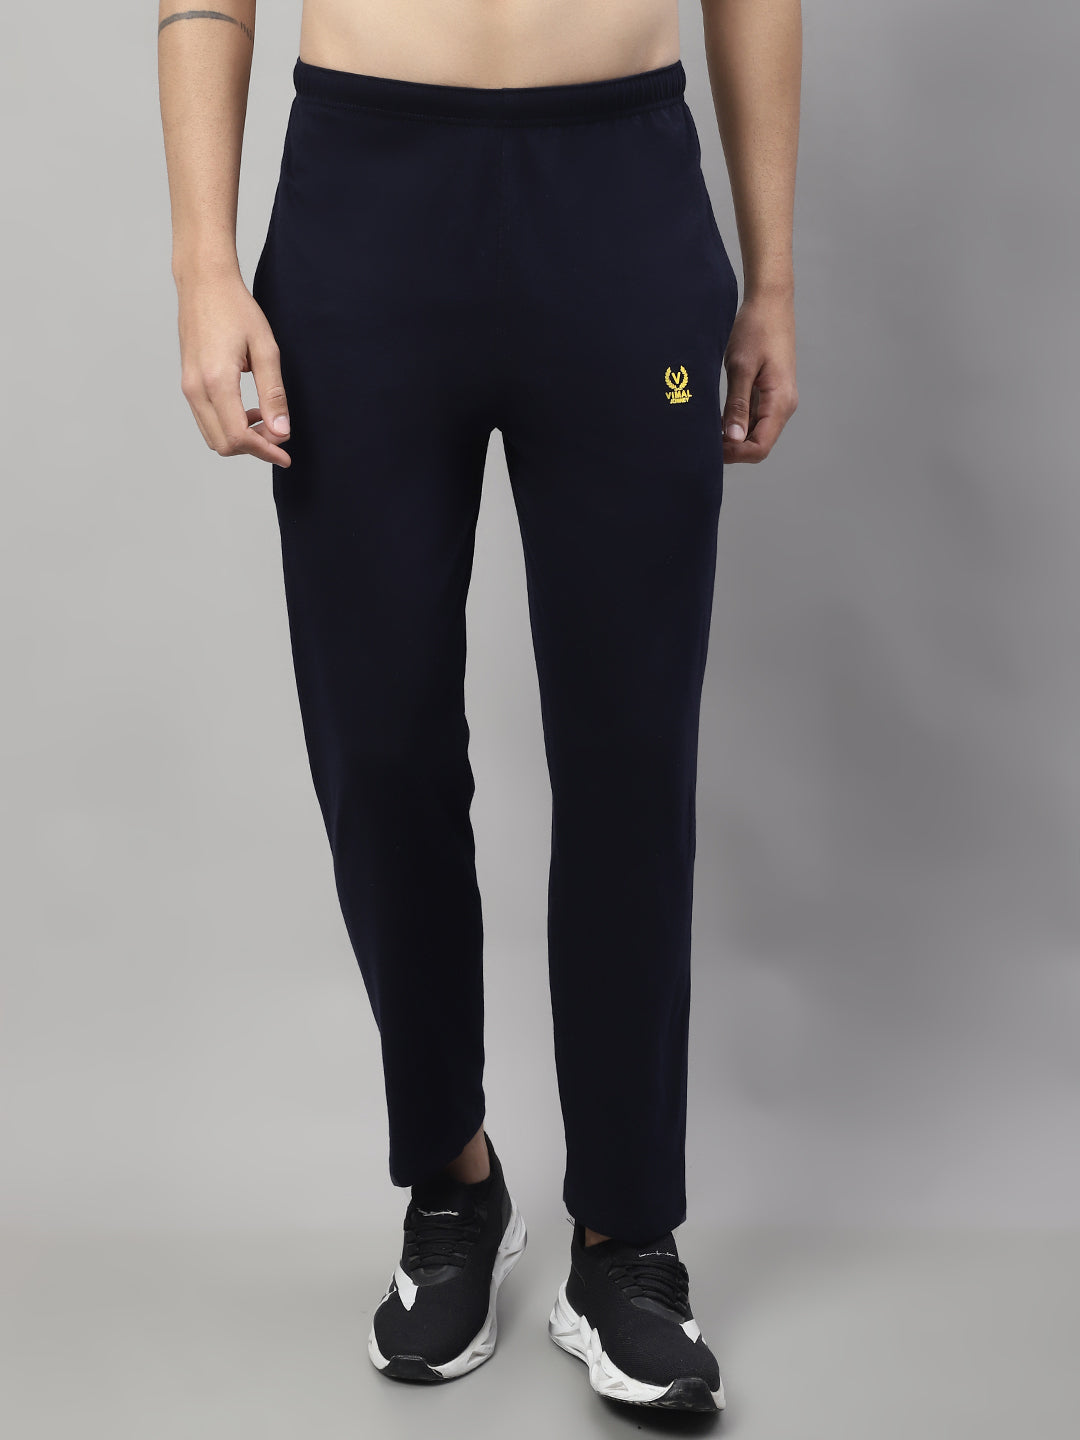 Women's Track Pants Sports Athletic Sweatpants with Zipper Pockets - WF  Shopping